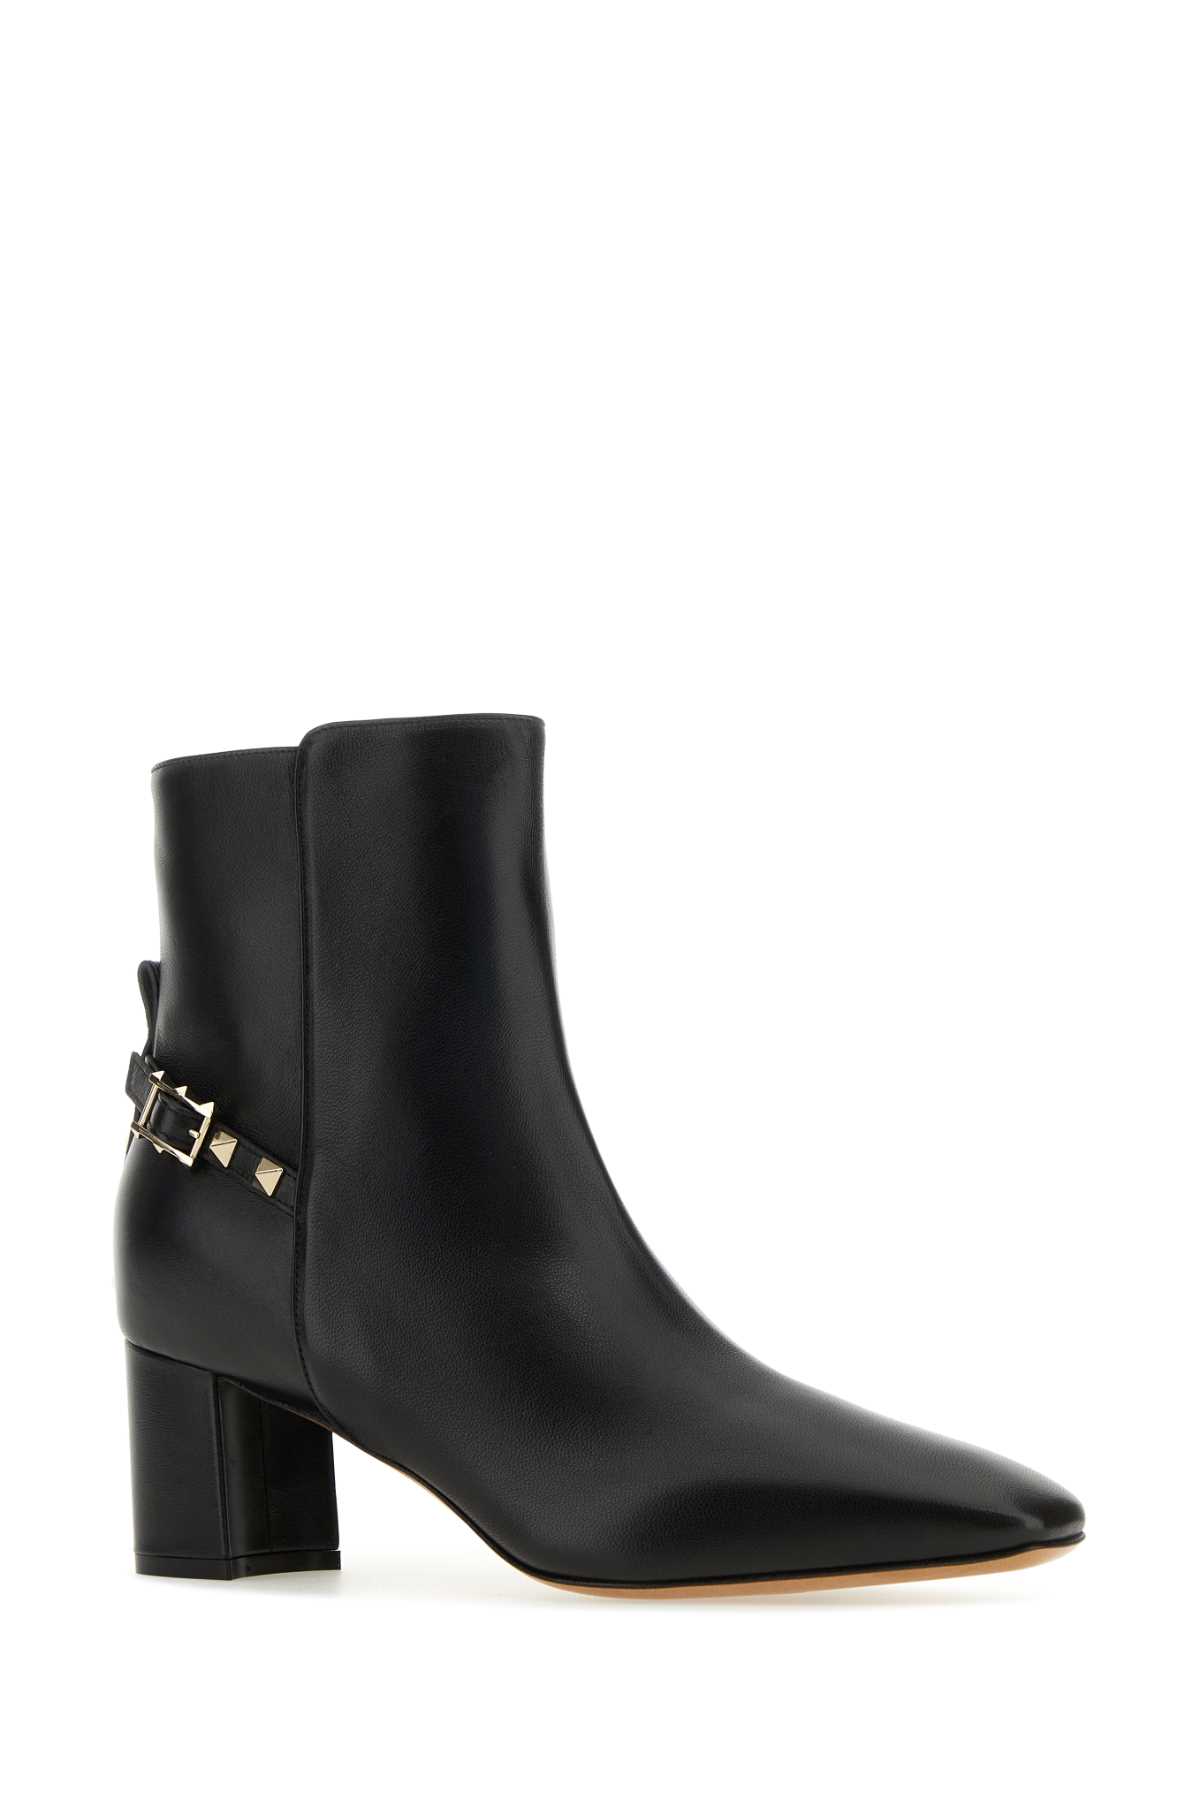 Shop Valentino Black Nappa Leather Rockstud Ankle Boots In Nero